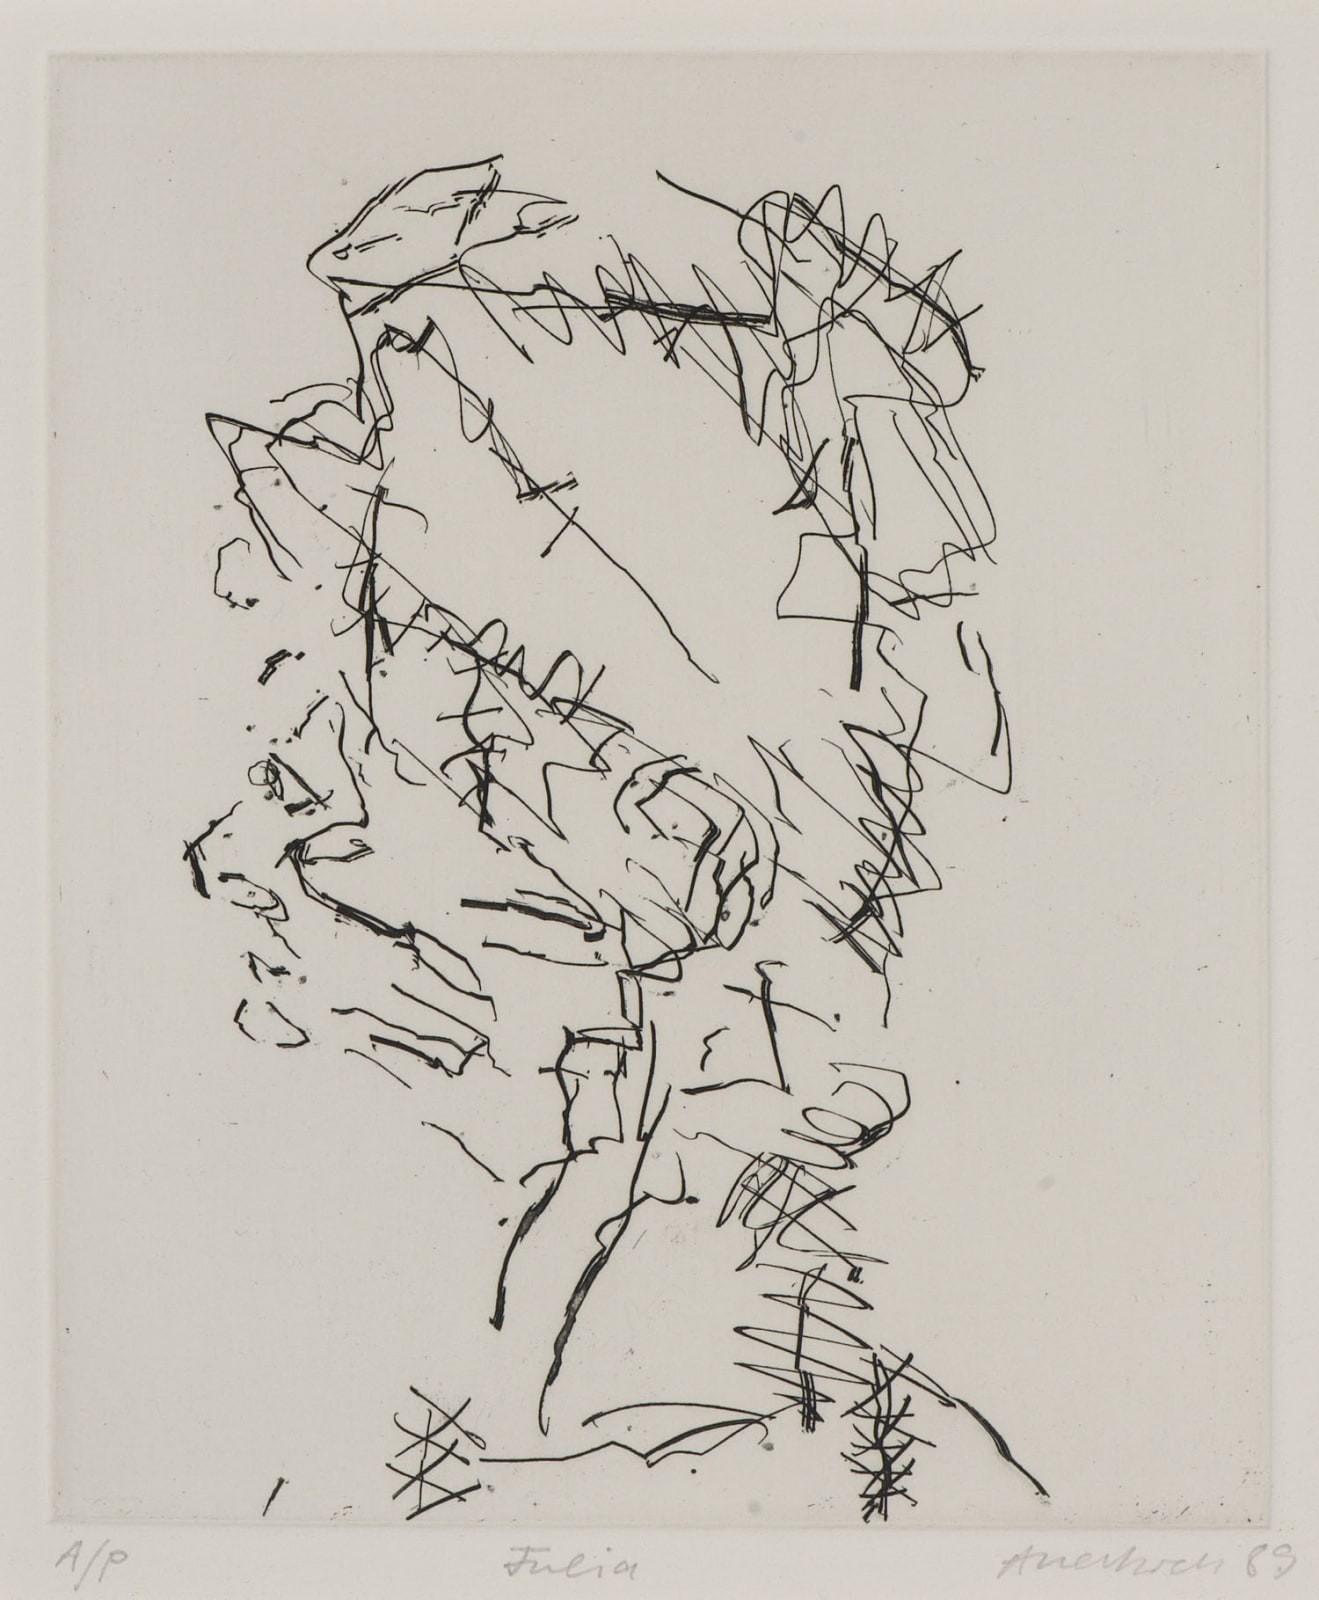 Frank Auerbach (1931-) Julia, Series: Part of Seven Portraits 1989 Etching, printed on Somerset white paper, artist's proof outside the published edition of 50 19.5 x 16.5 cm Ben Uri Collection © Frank Auerbach, courtesy Marlborough Fine Art